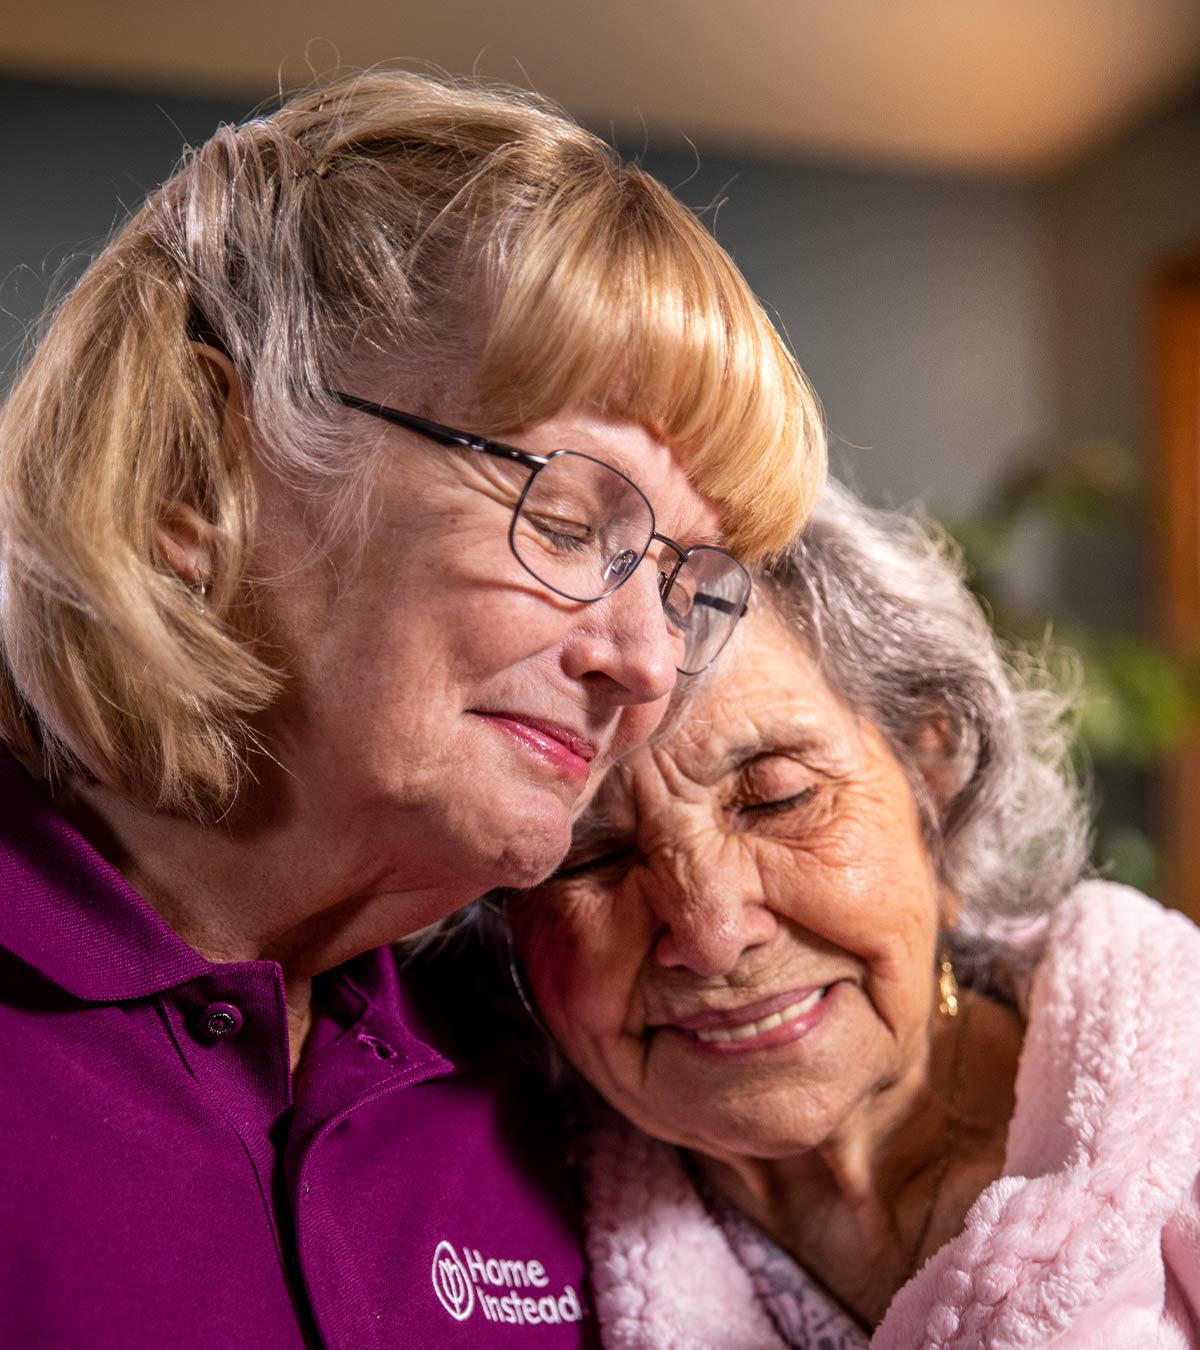 CAREGiver providing in-home senior care services. Home Instead of Iowa City, IA provides Elder Care to aging adults. 